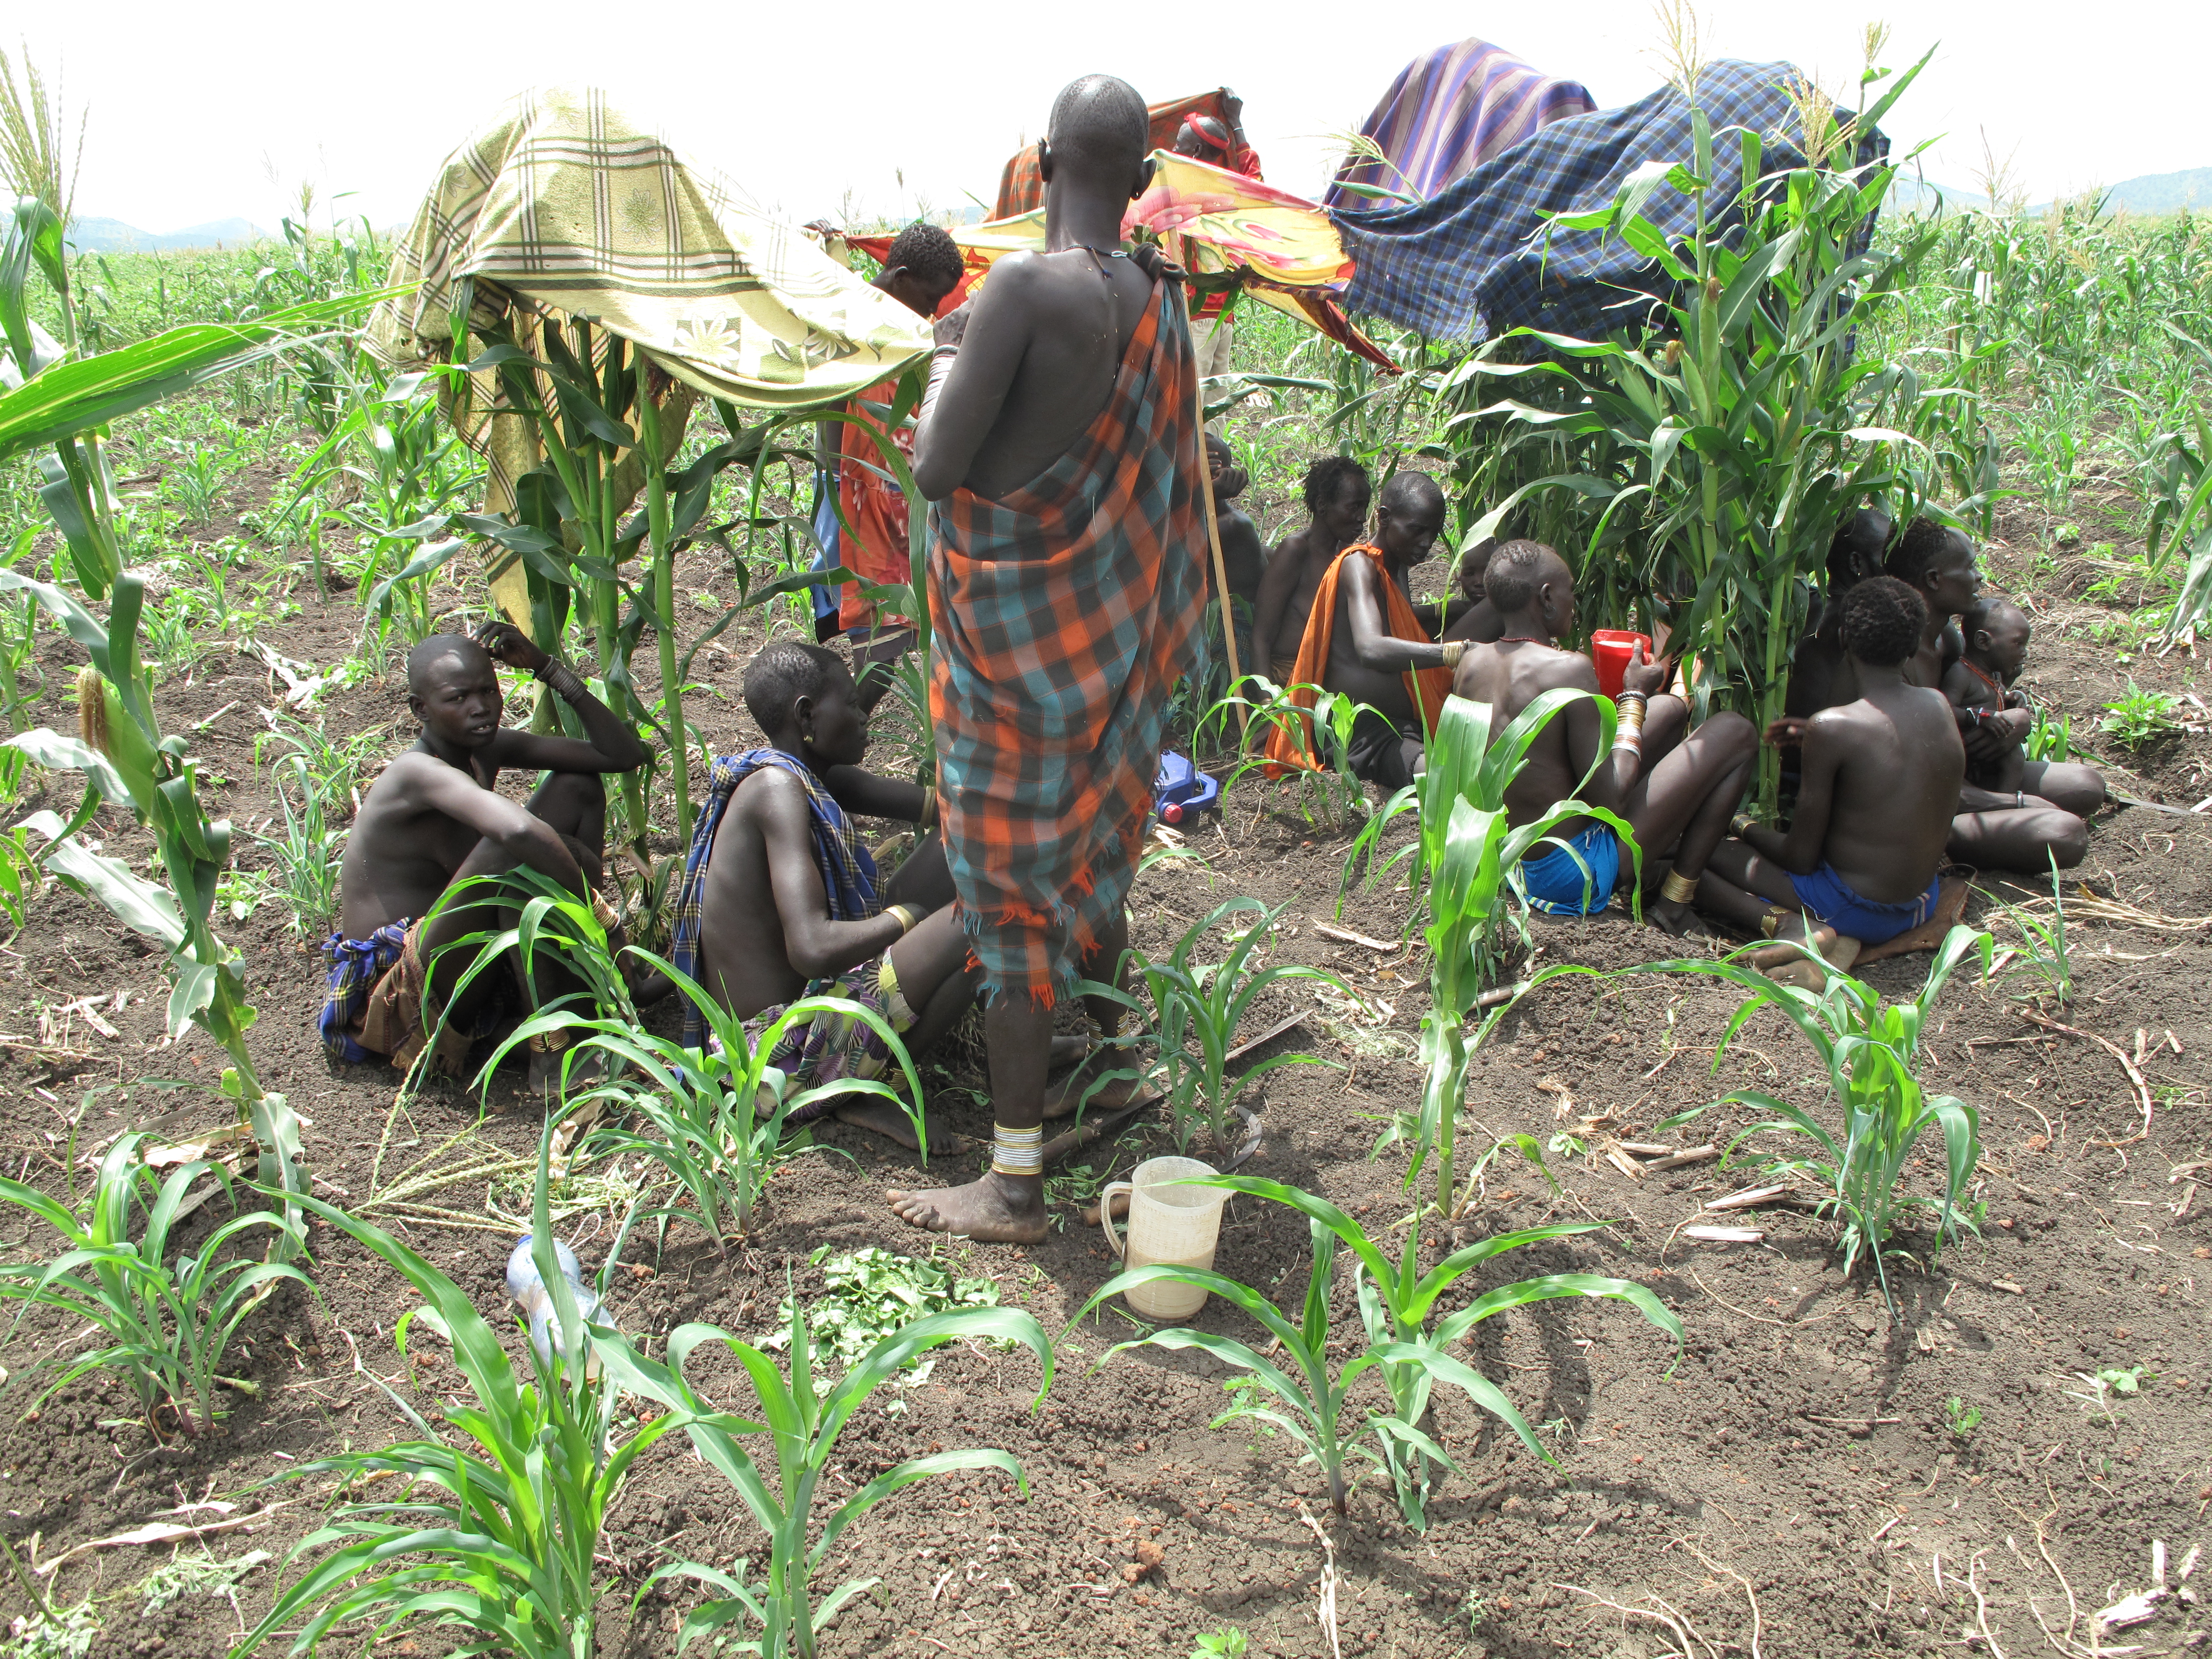 Bodi people resting under the shade during a work-party in the new treeless plots allocated to them by the Ethiopian Sugar Corporation